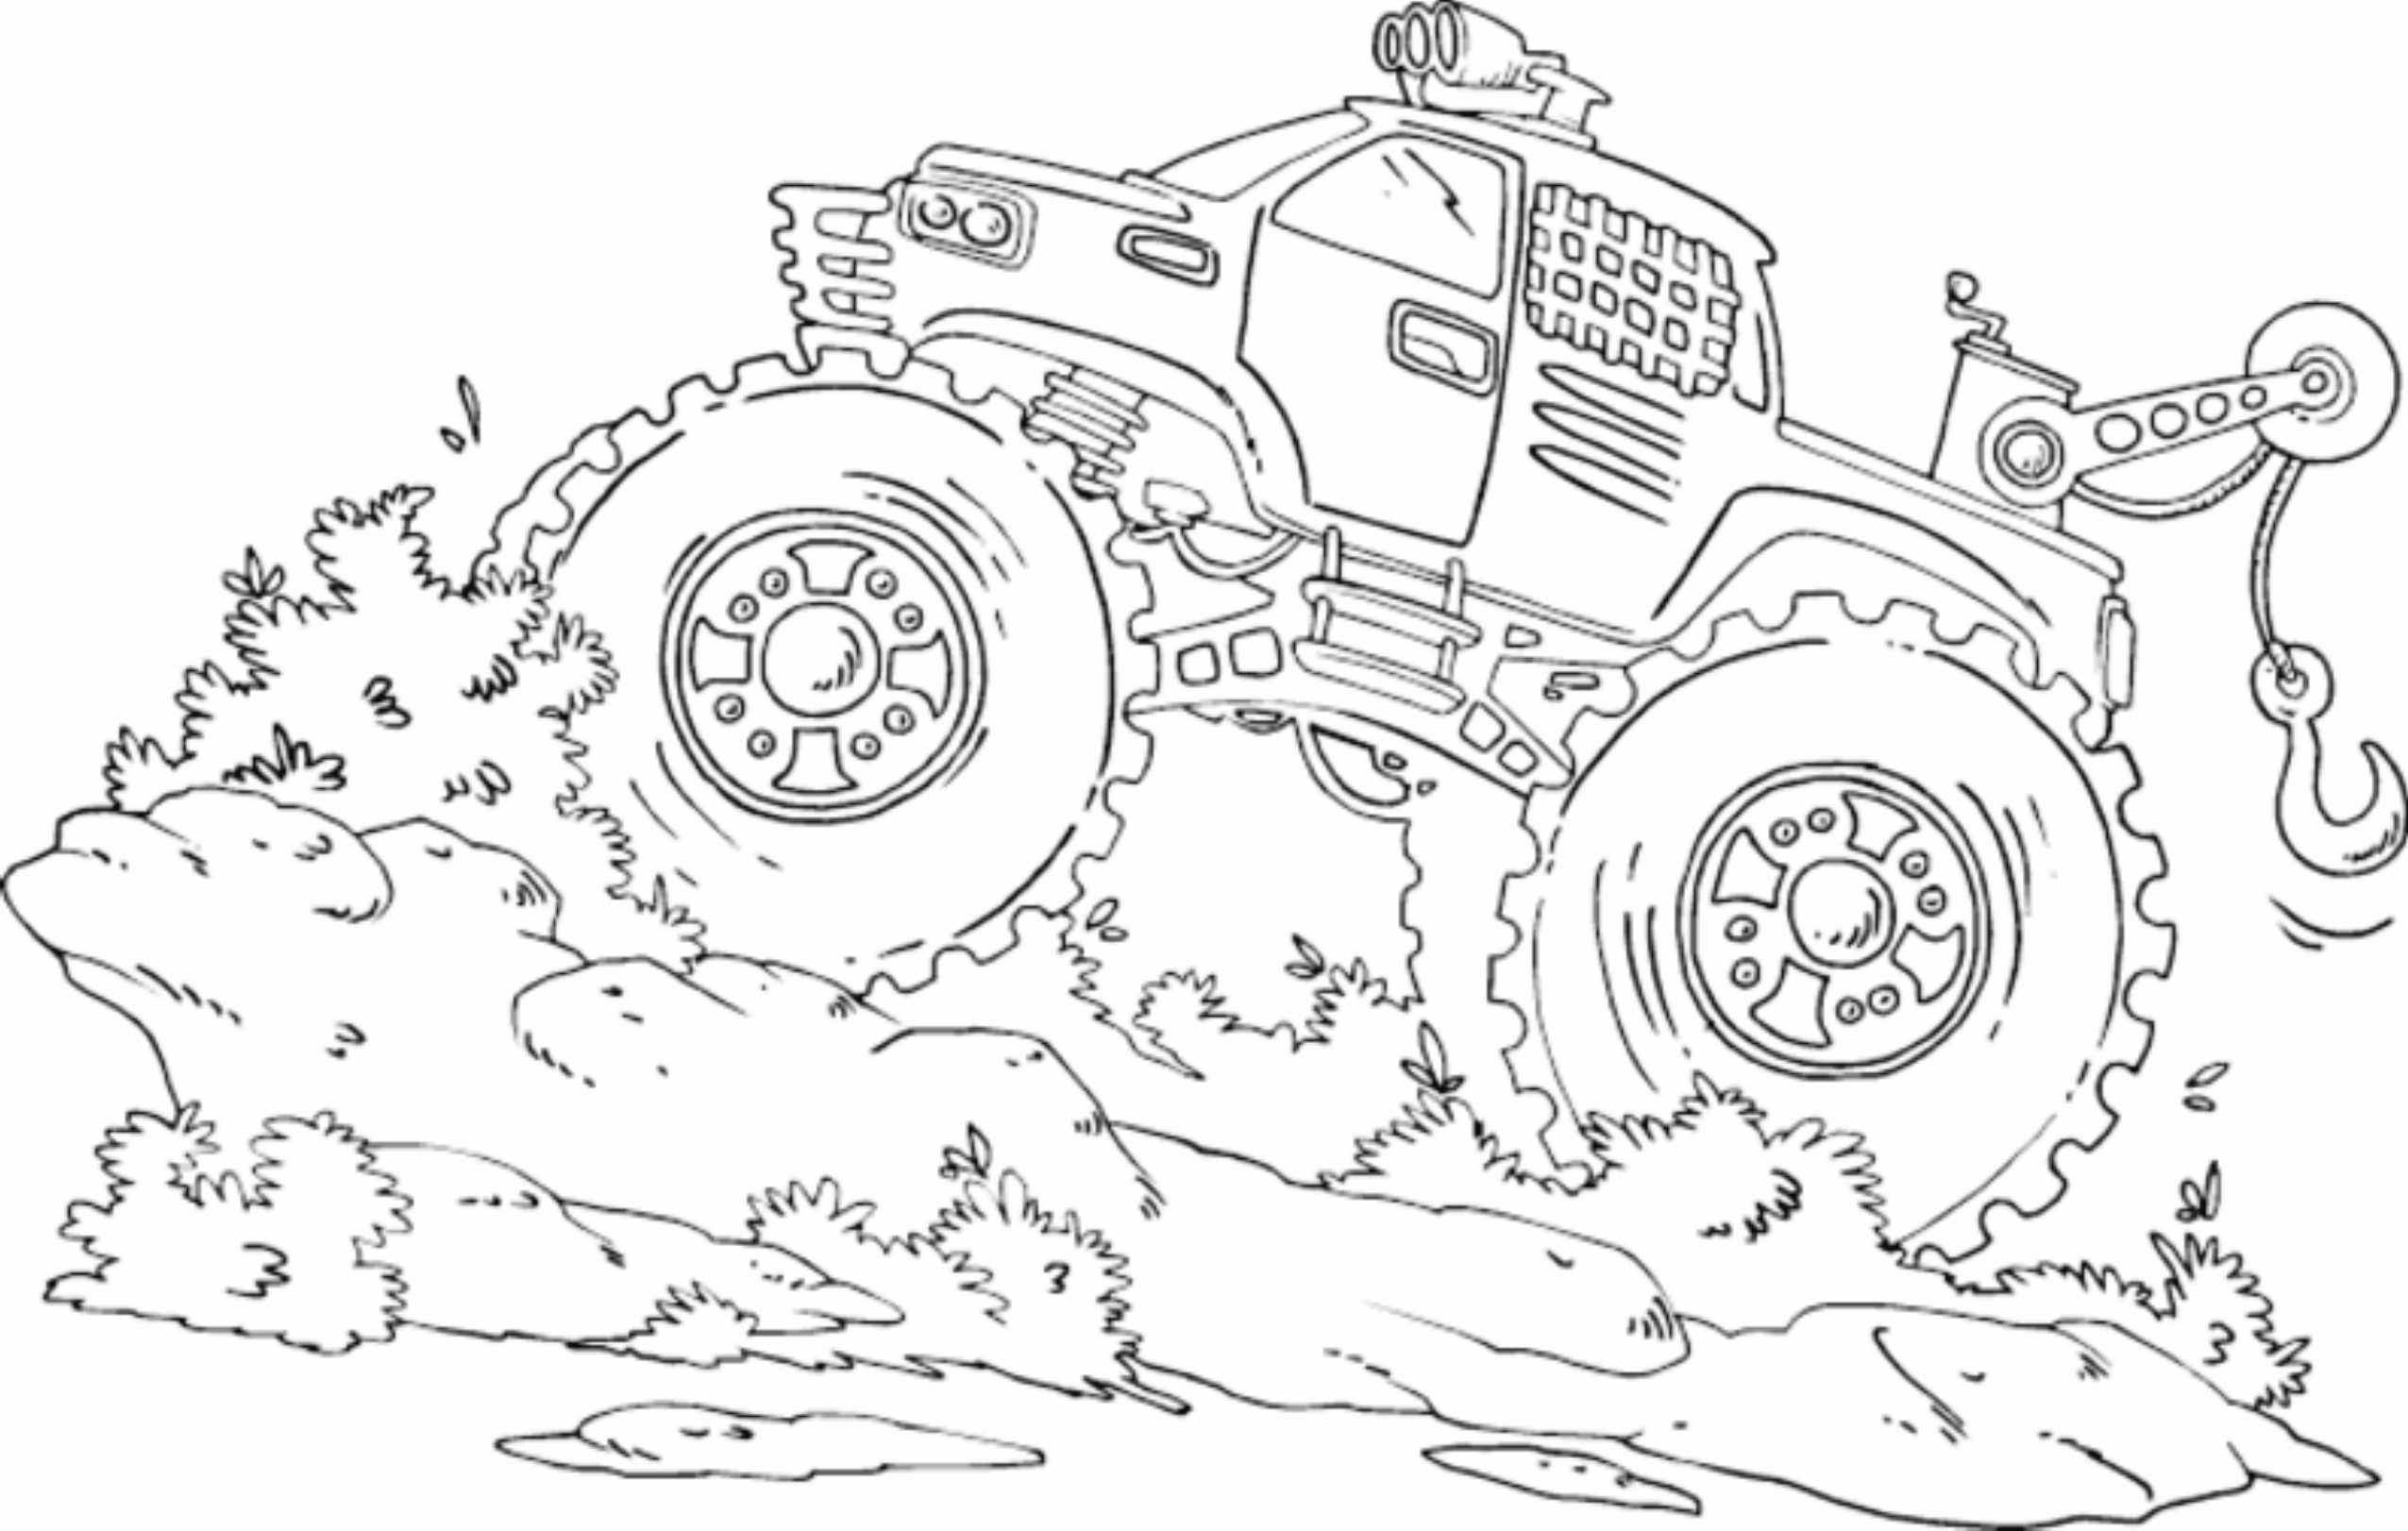 printable-monster-truck-pictures-printable-blank-world